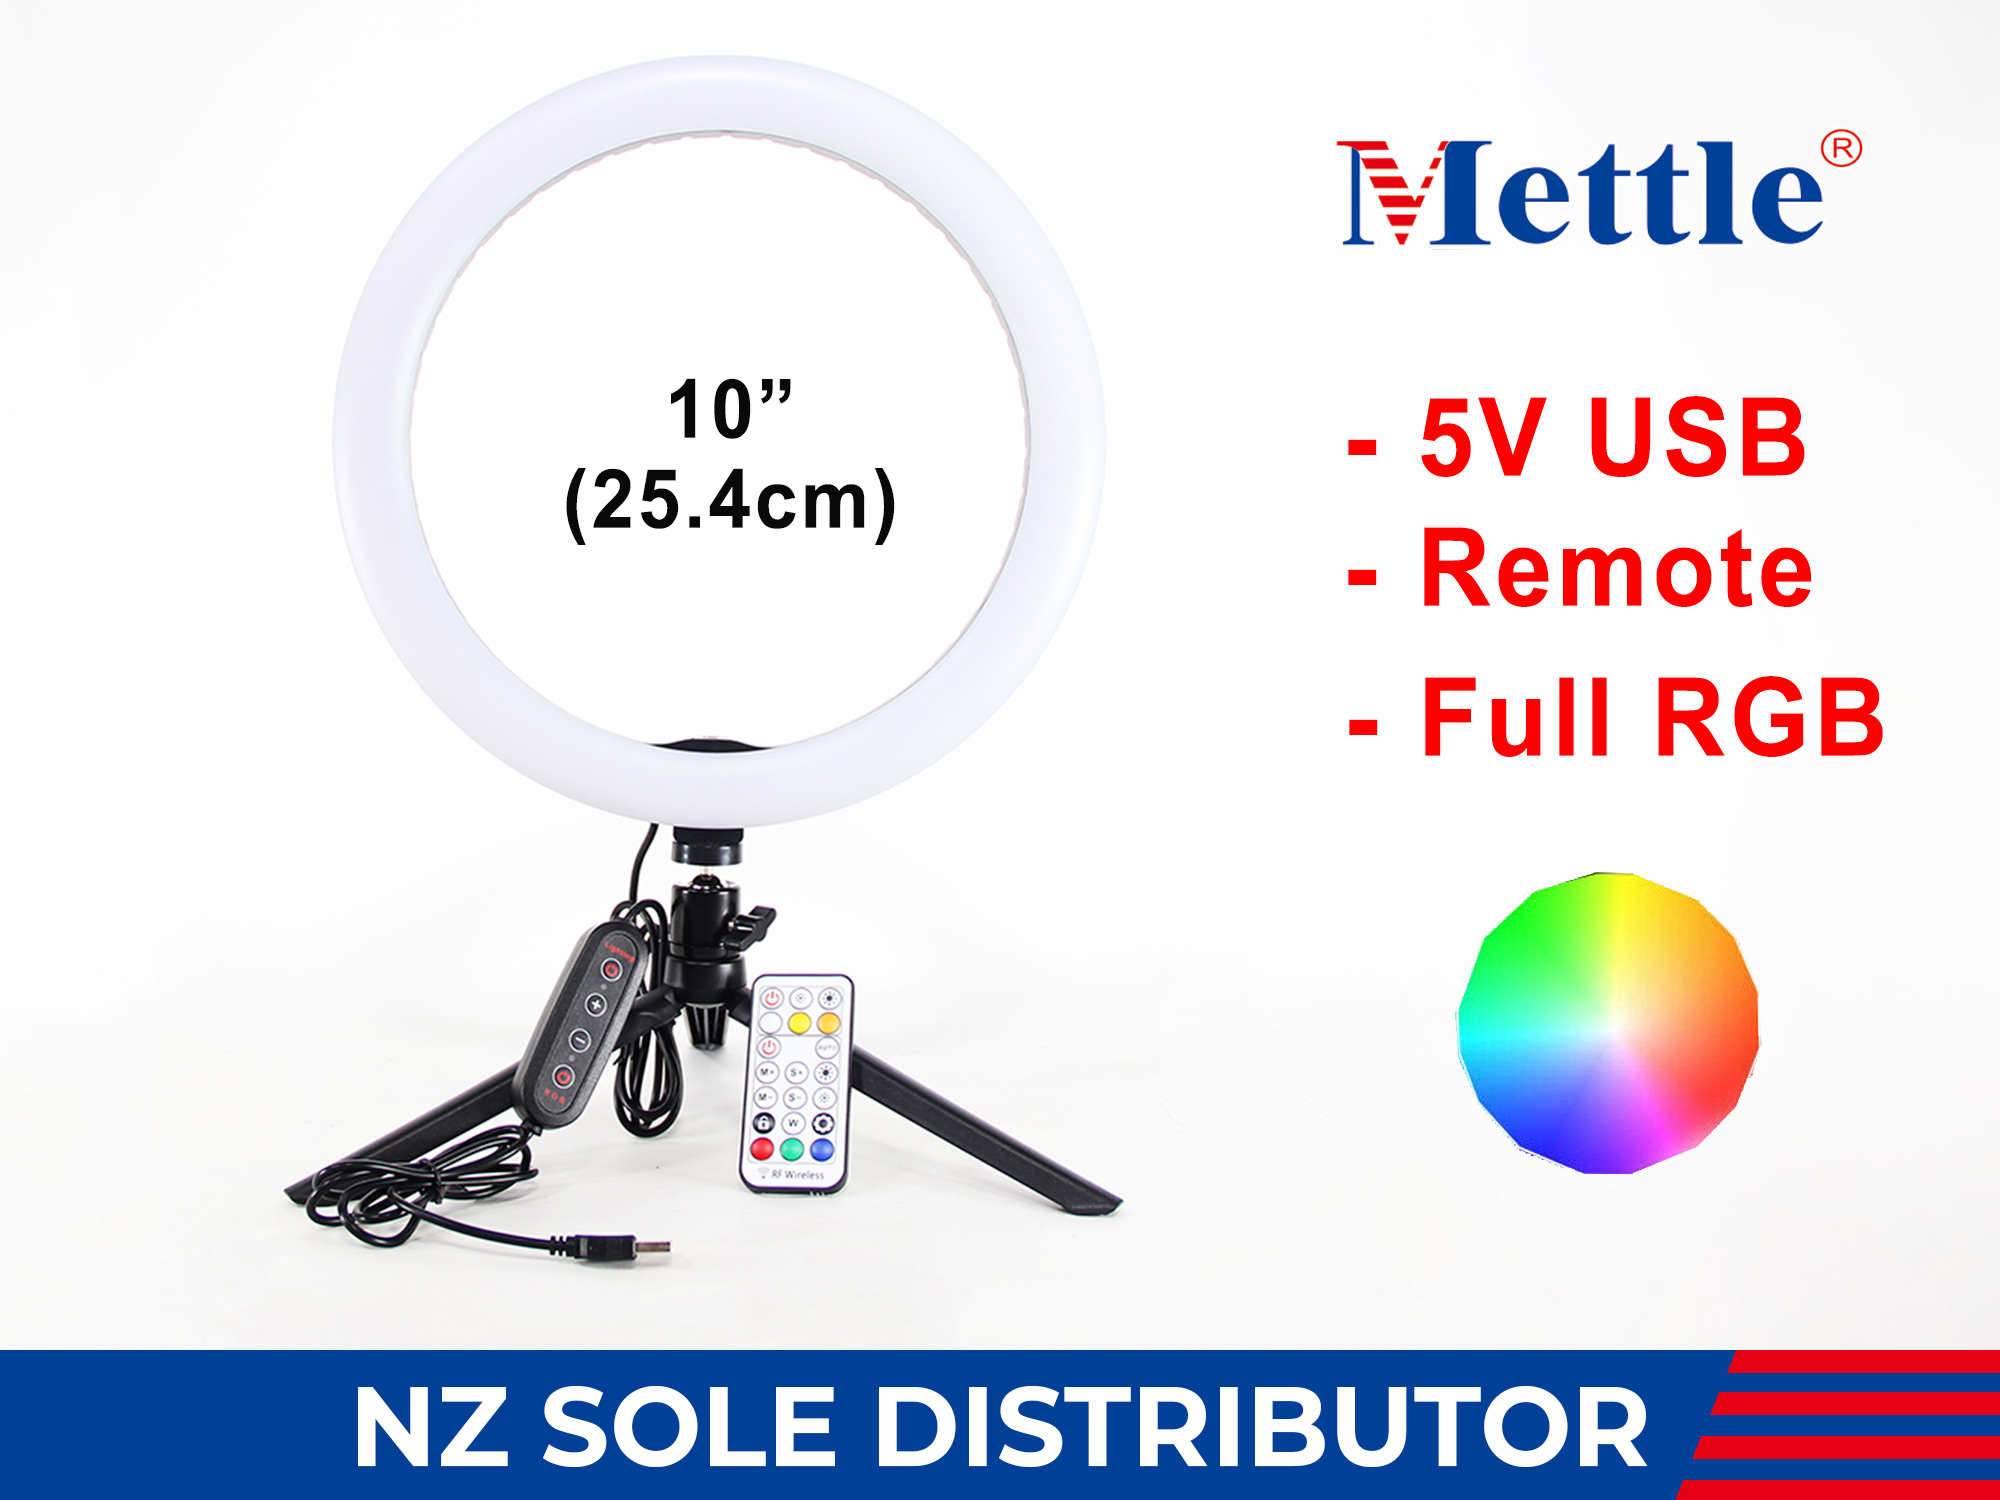 Mettle RGB LED 10" ring light + remote Tripod and flexible phone holder